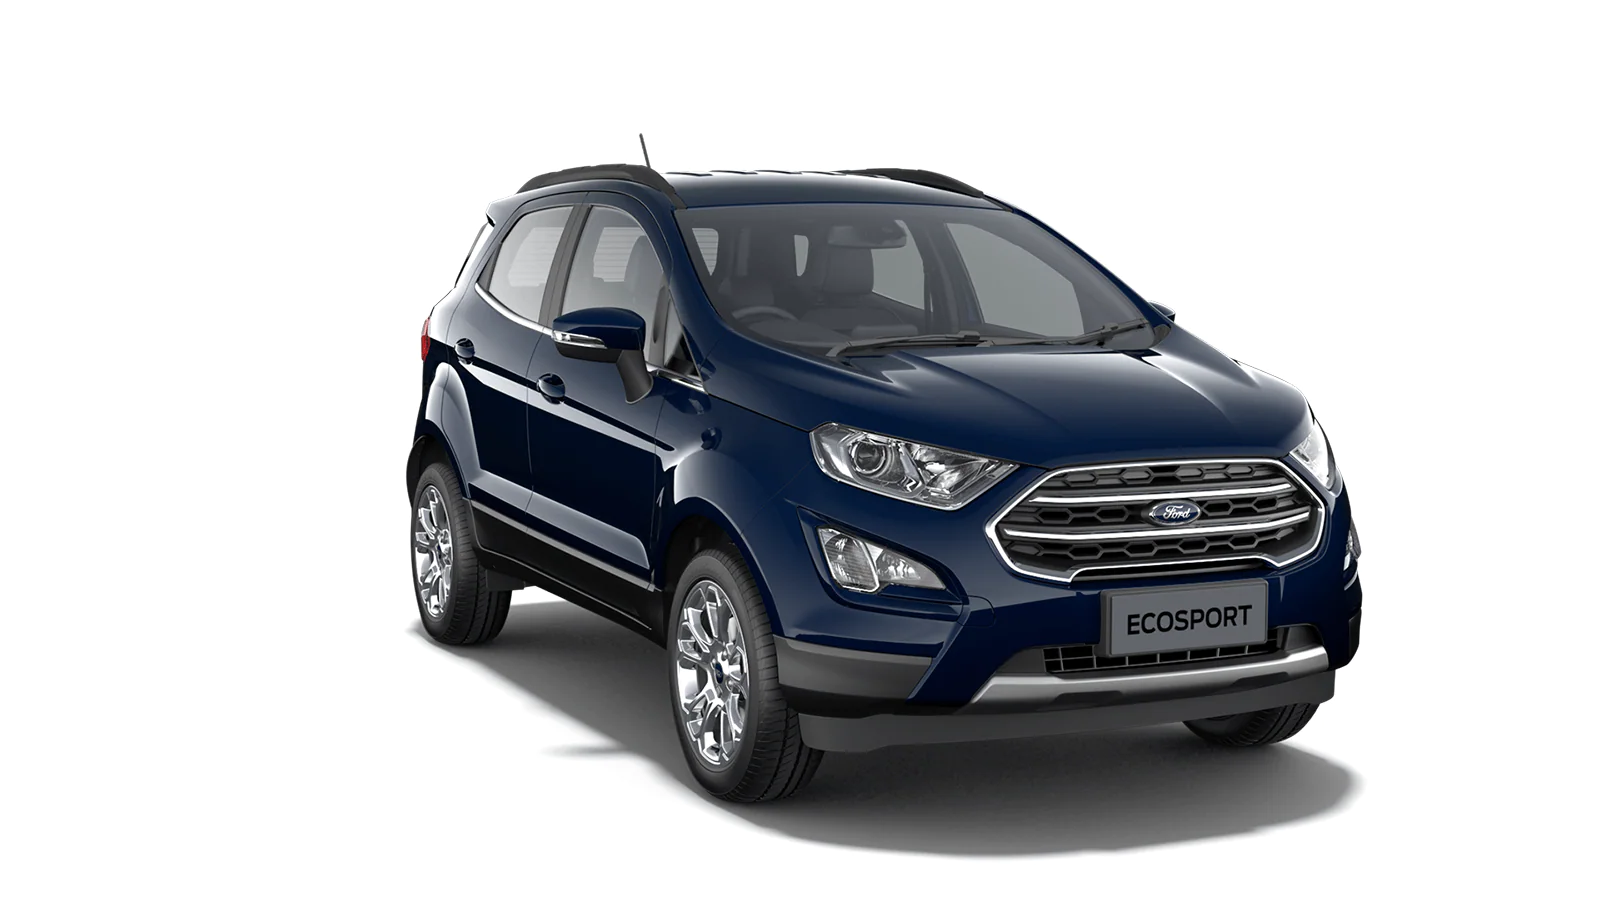 The Ford S-Max is a versatile and spacious family car that offers a perfect blend of style and practicality. At Car Accessories Plus, we offer a wide range of high-quality accessories to help you enhance and personalize your Ford S-Max